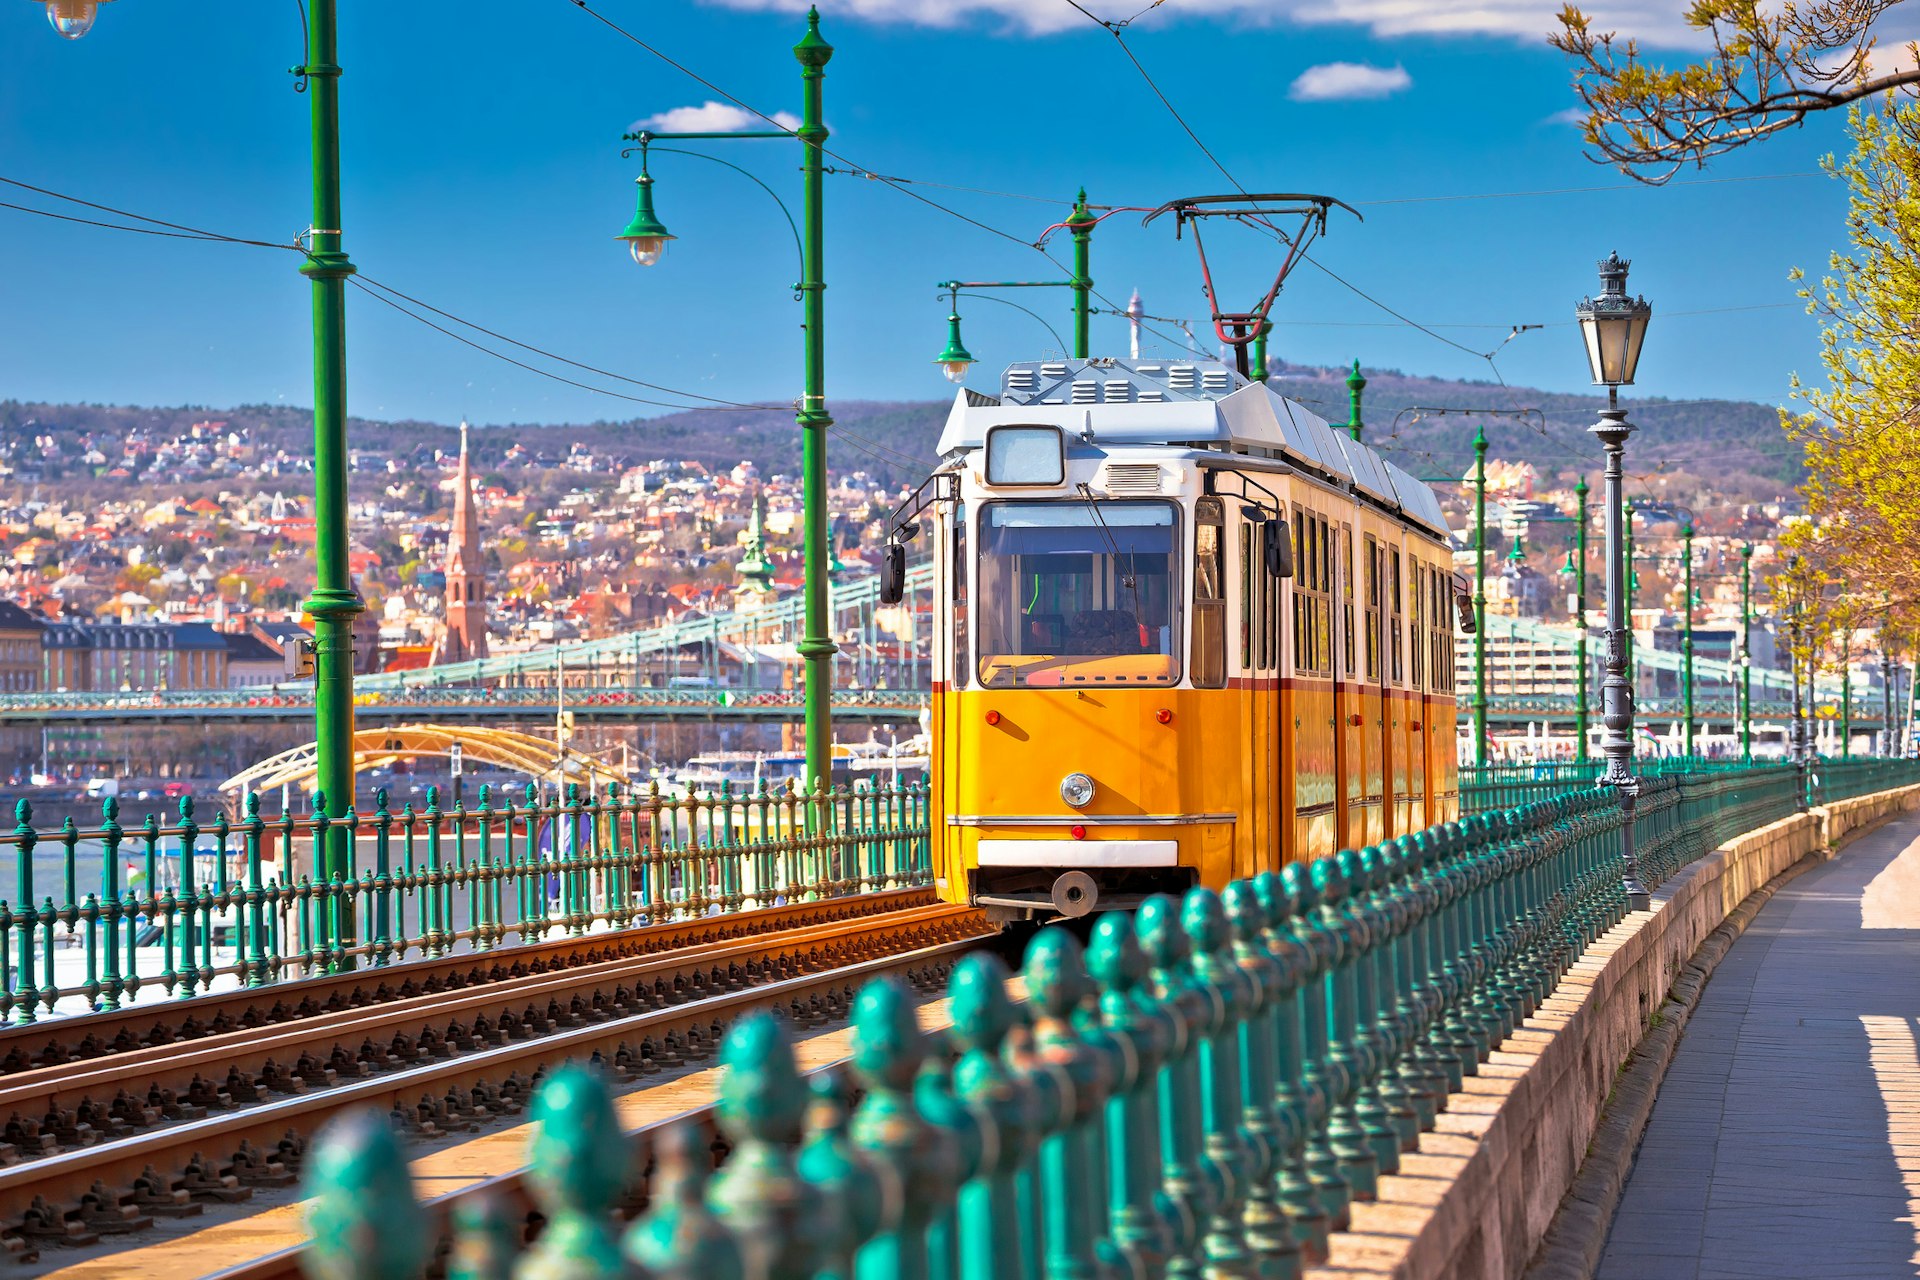 A yellow tram runs along the riverside in Budapest coming towards the camera